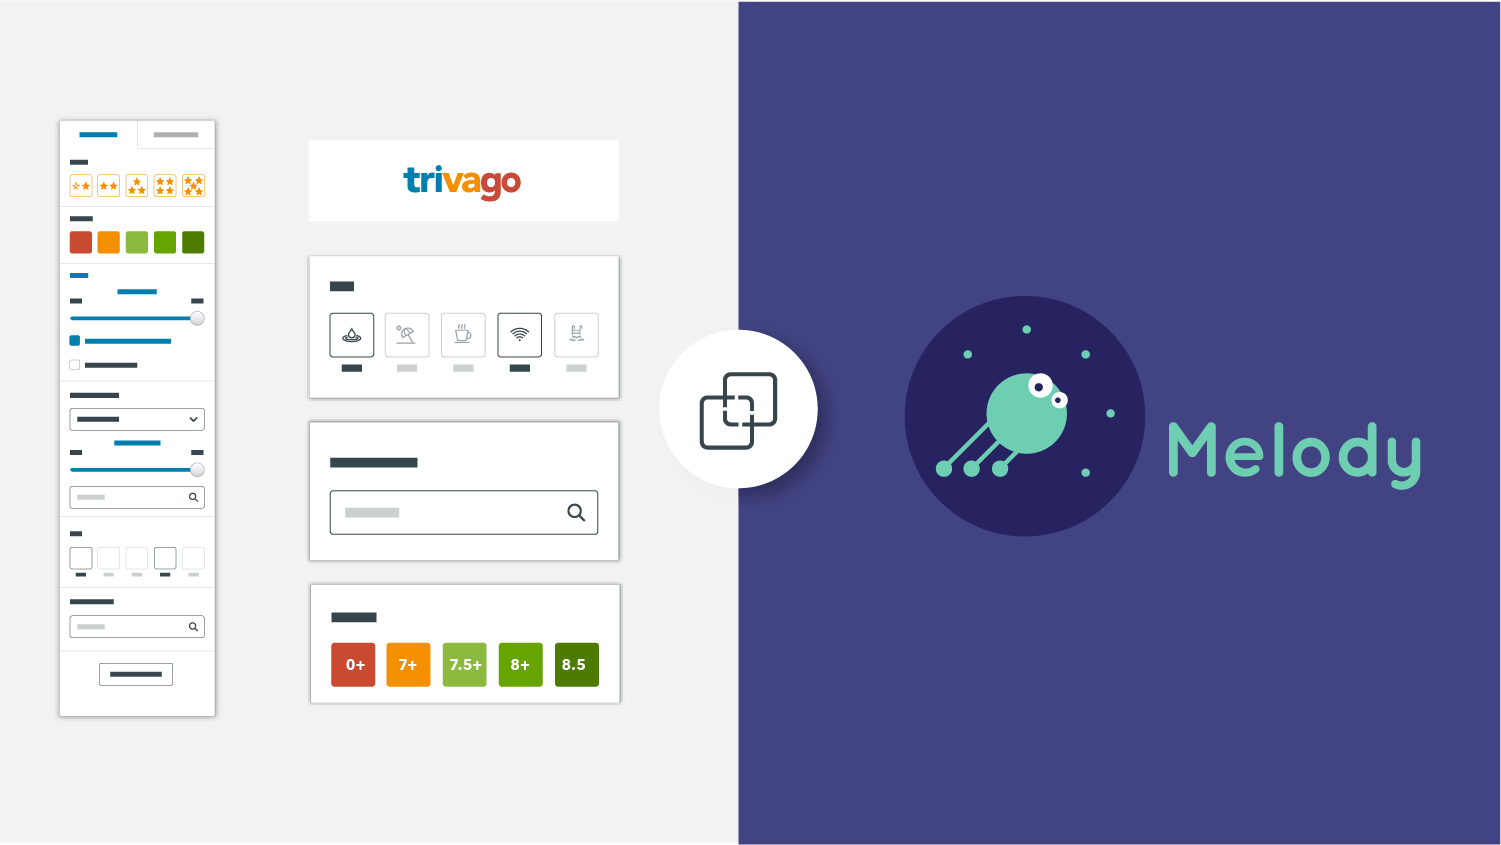 trivago just made filtering faster and more accessible, but why and how?